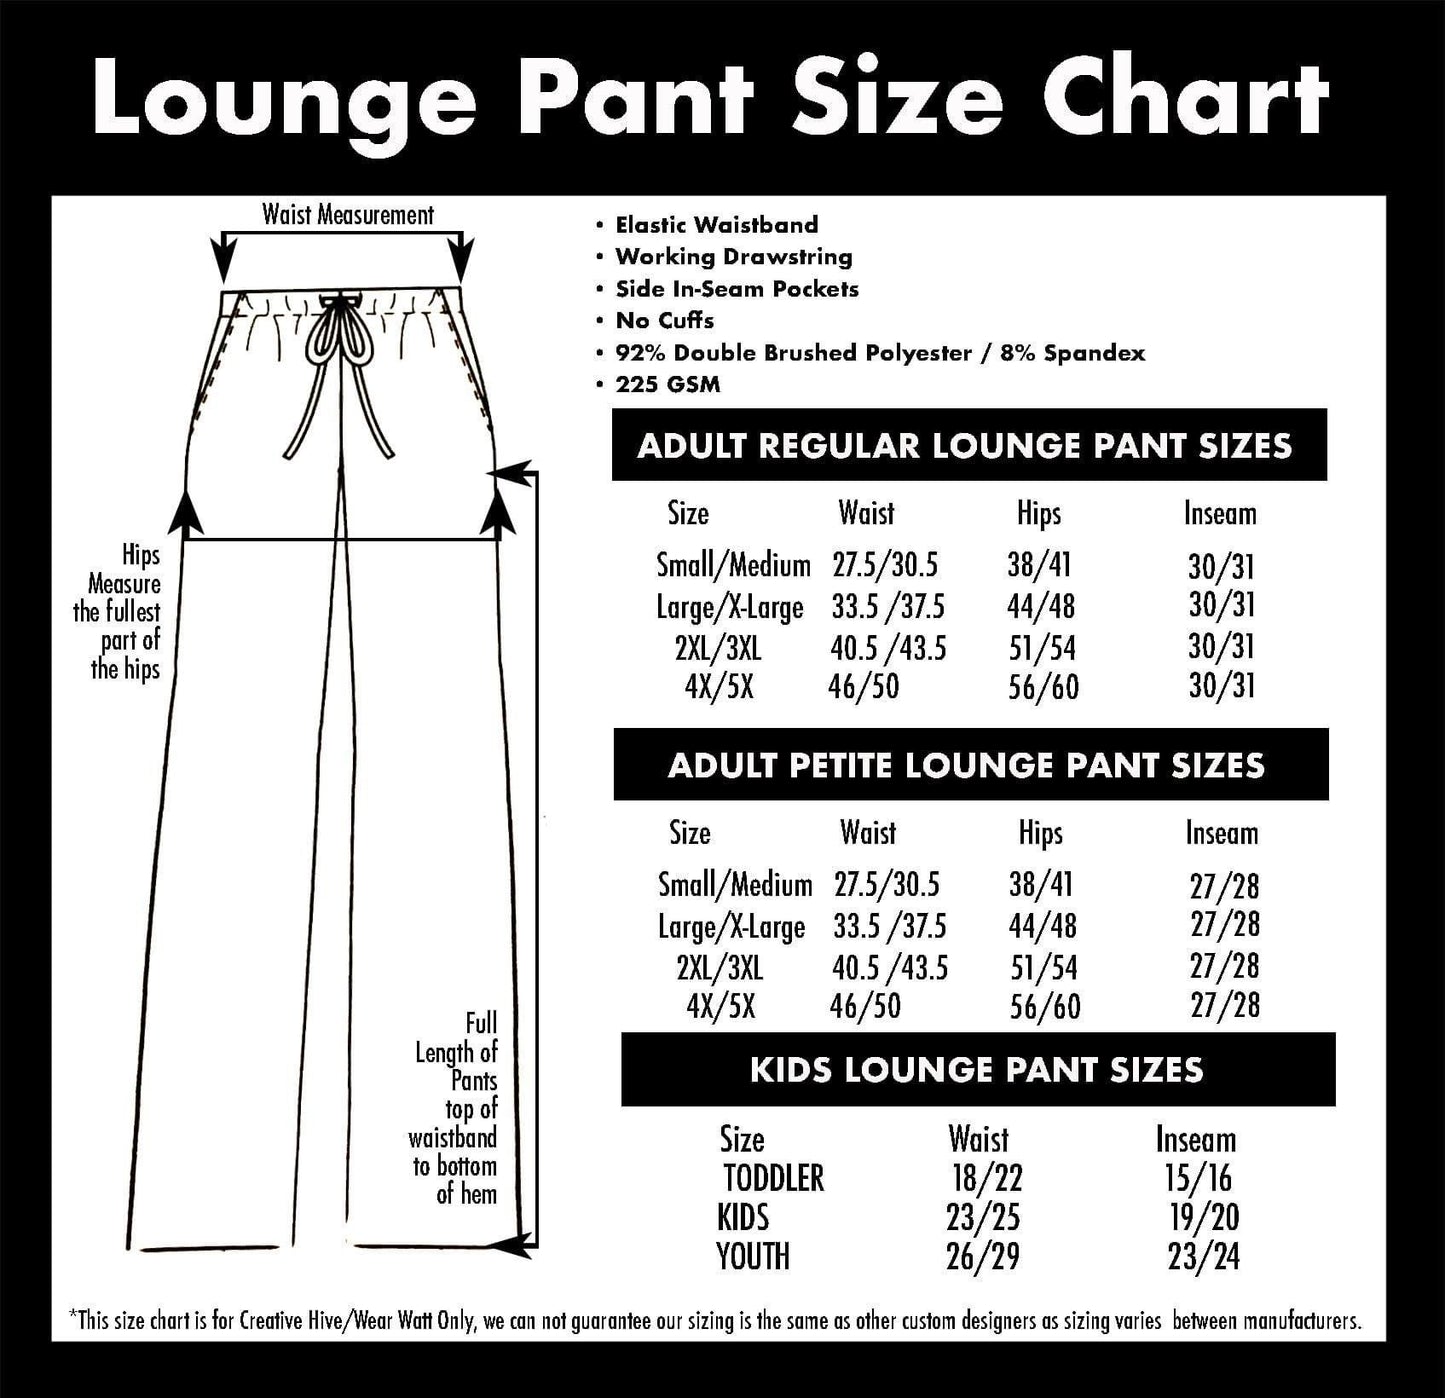 Red *Color Collection* - Lounge Pants